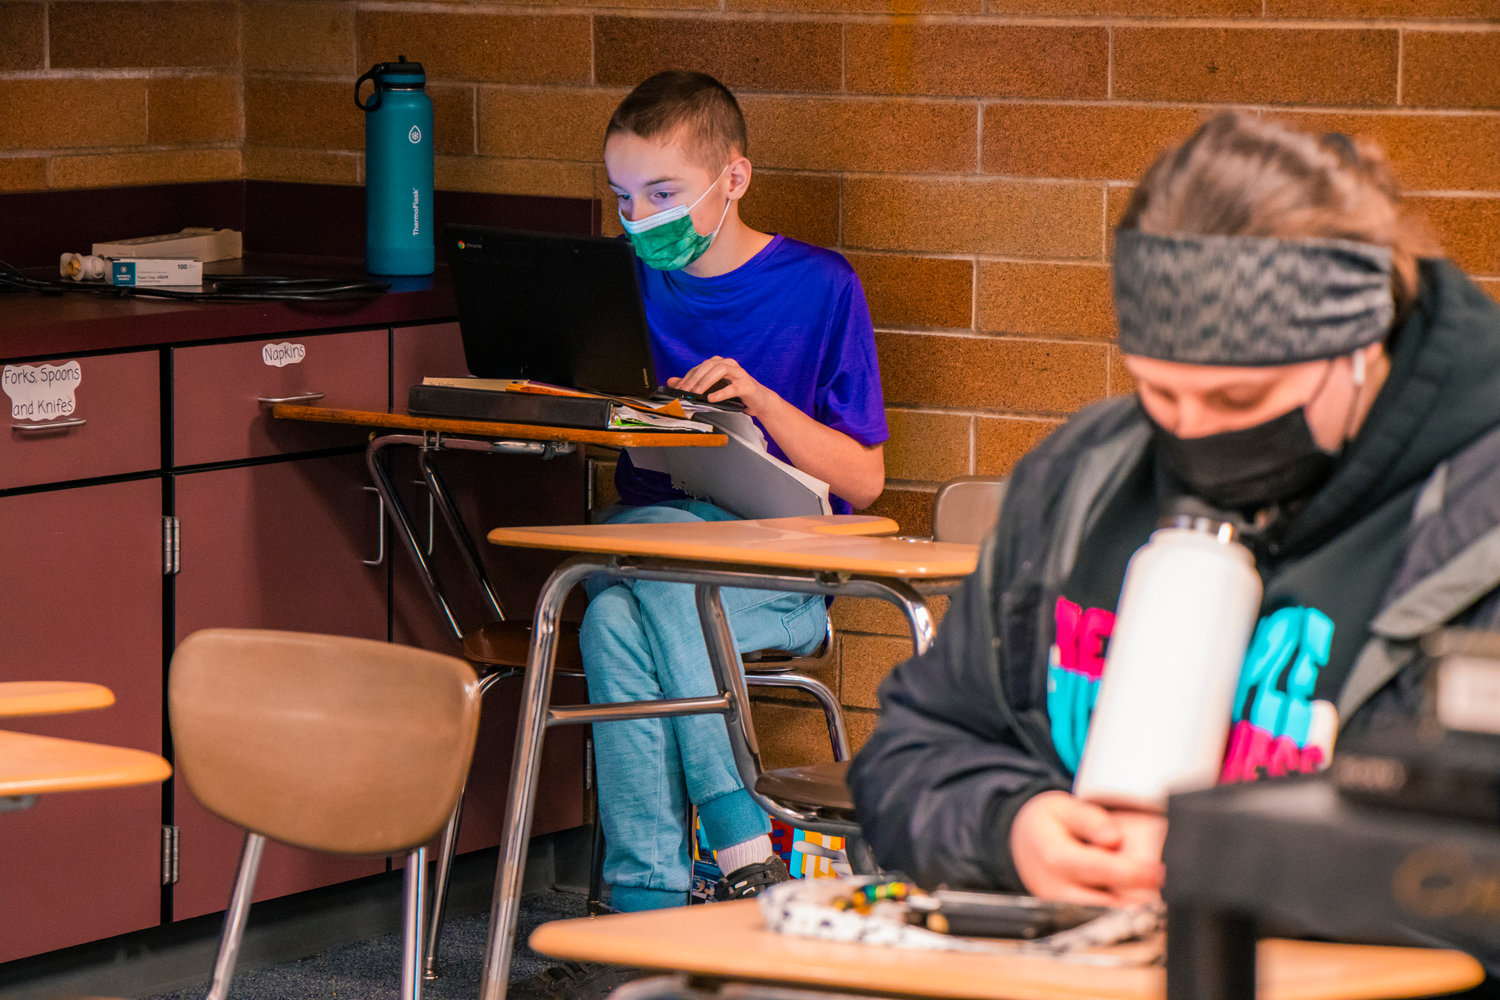 Onalaska students sport masks as they work on assignments in class on Tuesday.